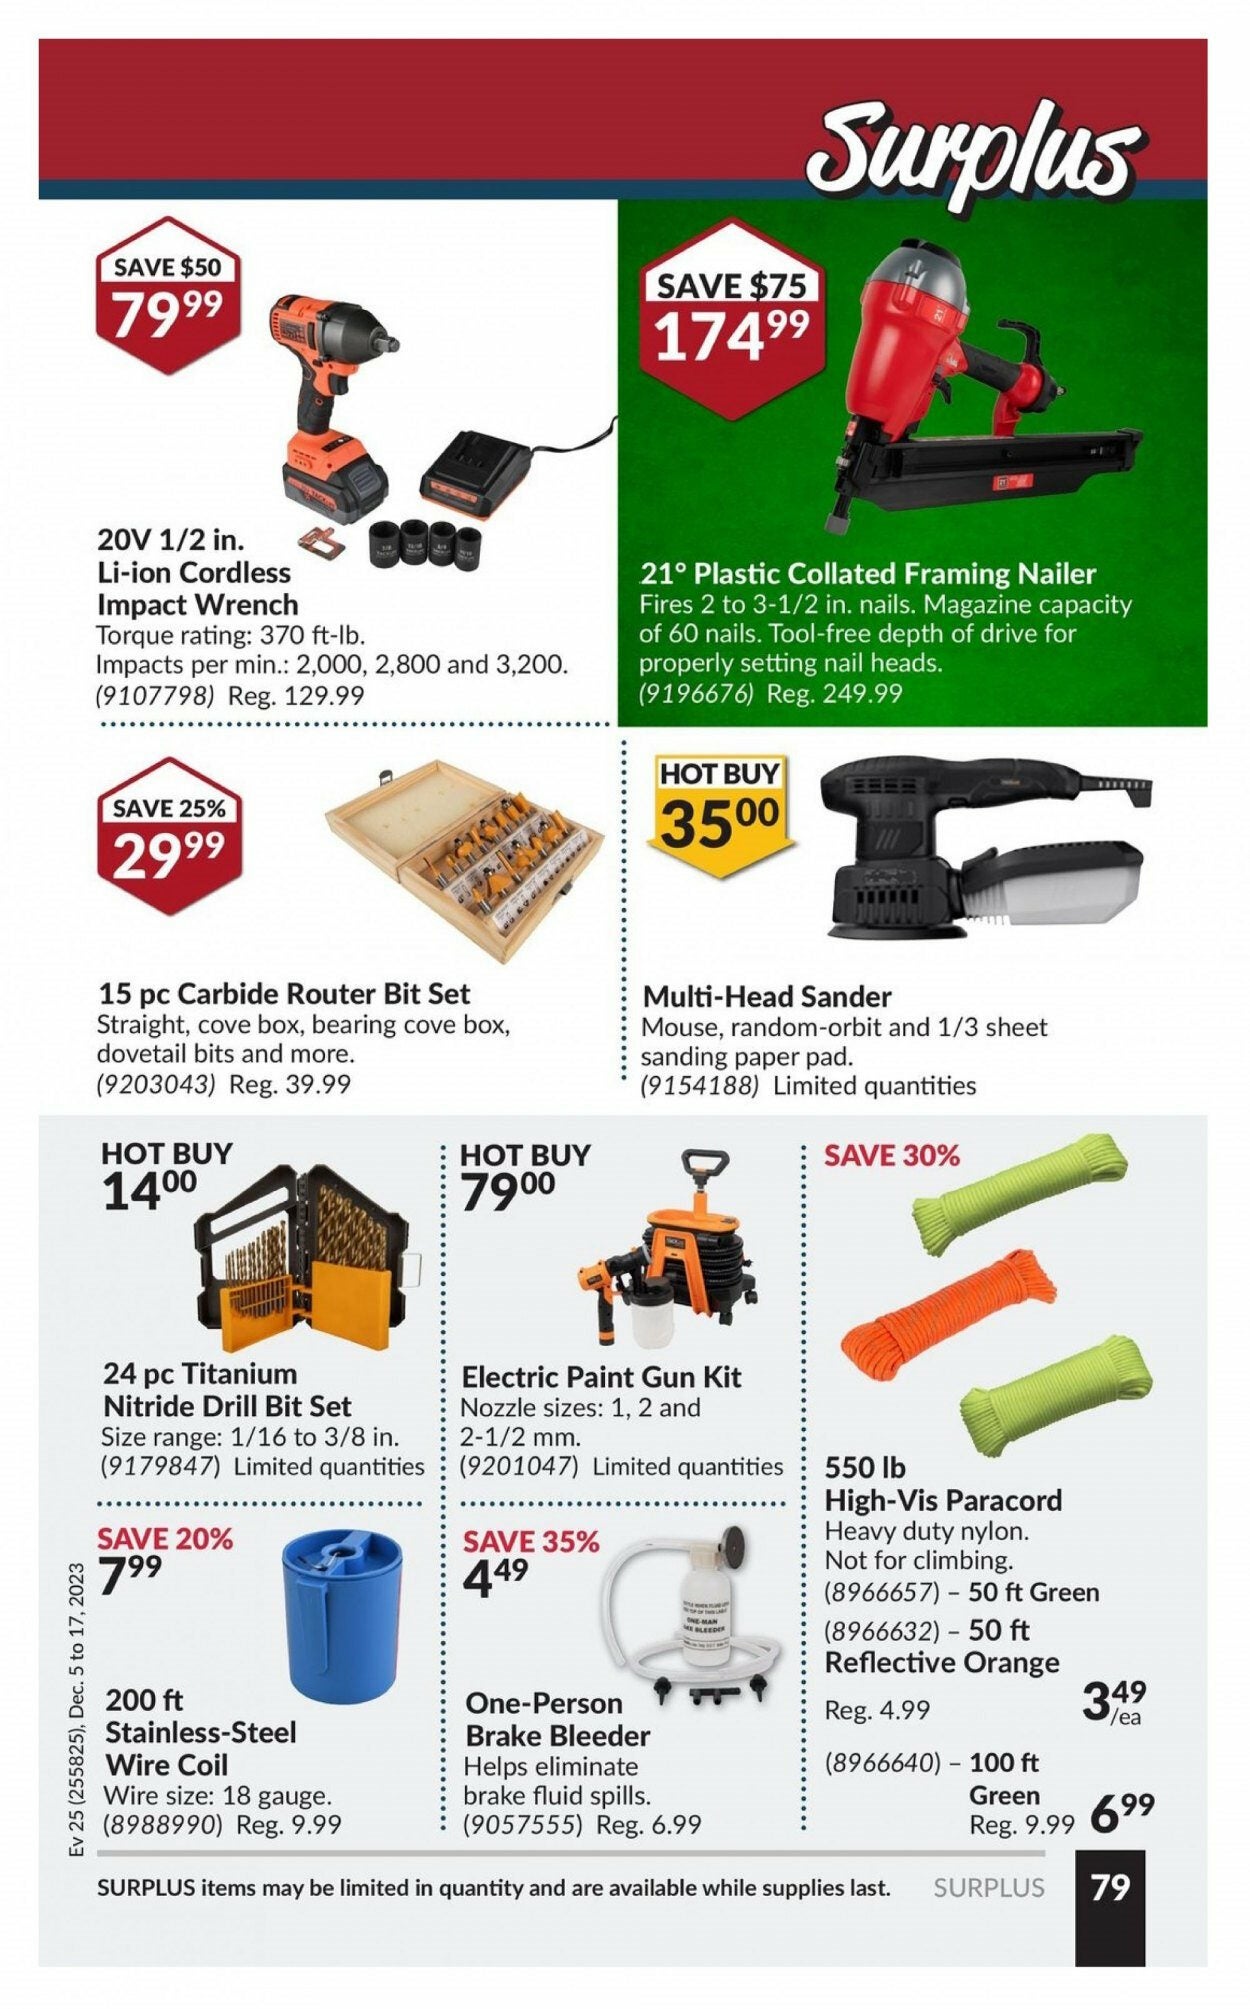 Princess Auto Weekly Flyer - 2 Week Sale - From Santa's Workshop To Yours -  Dec 5 – 17 